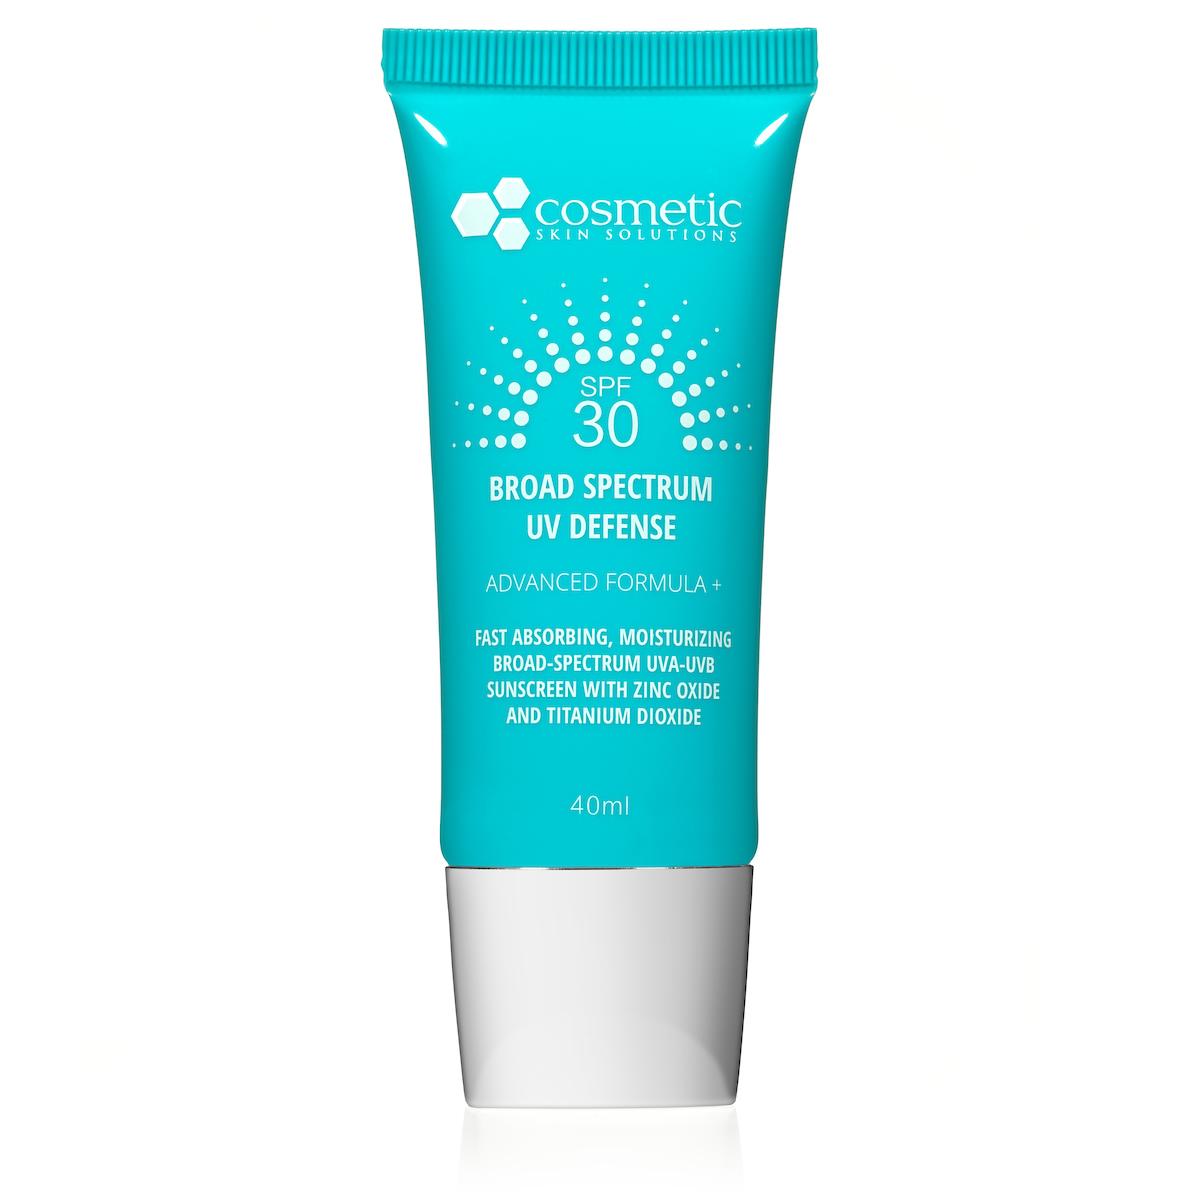 Mineral Sunscreen - SP-F30 - Cosmetic Skin Solutions - 40ml